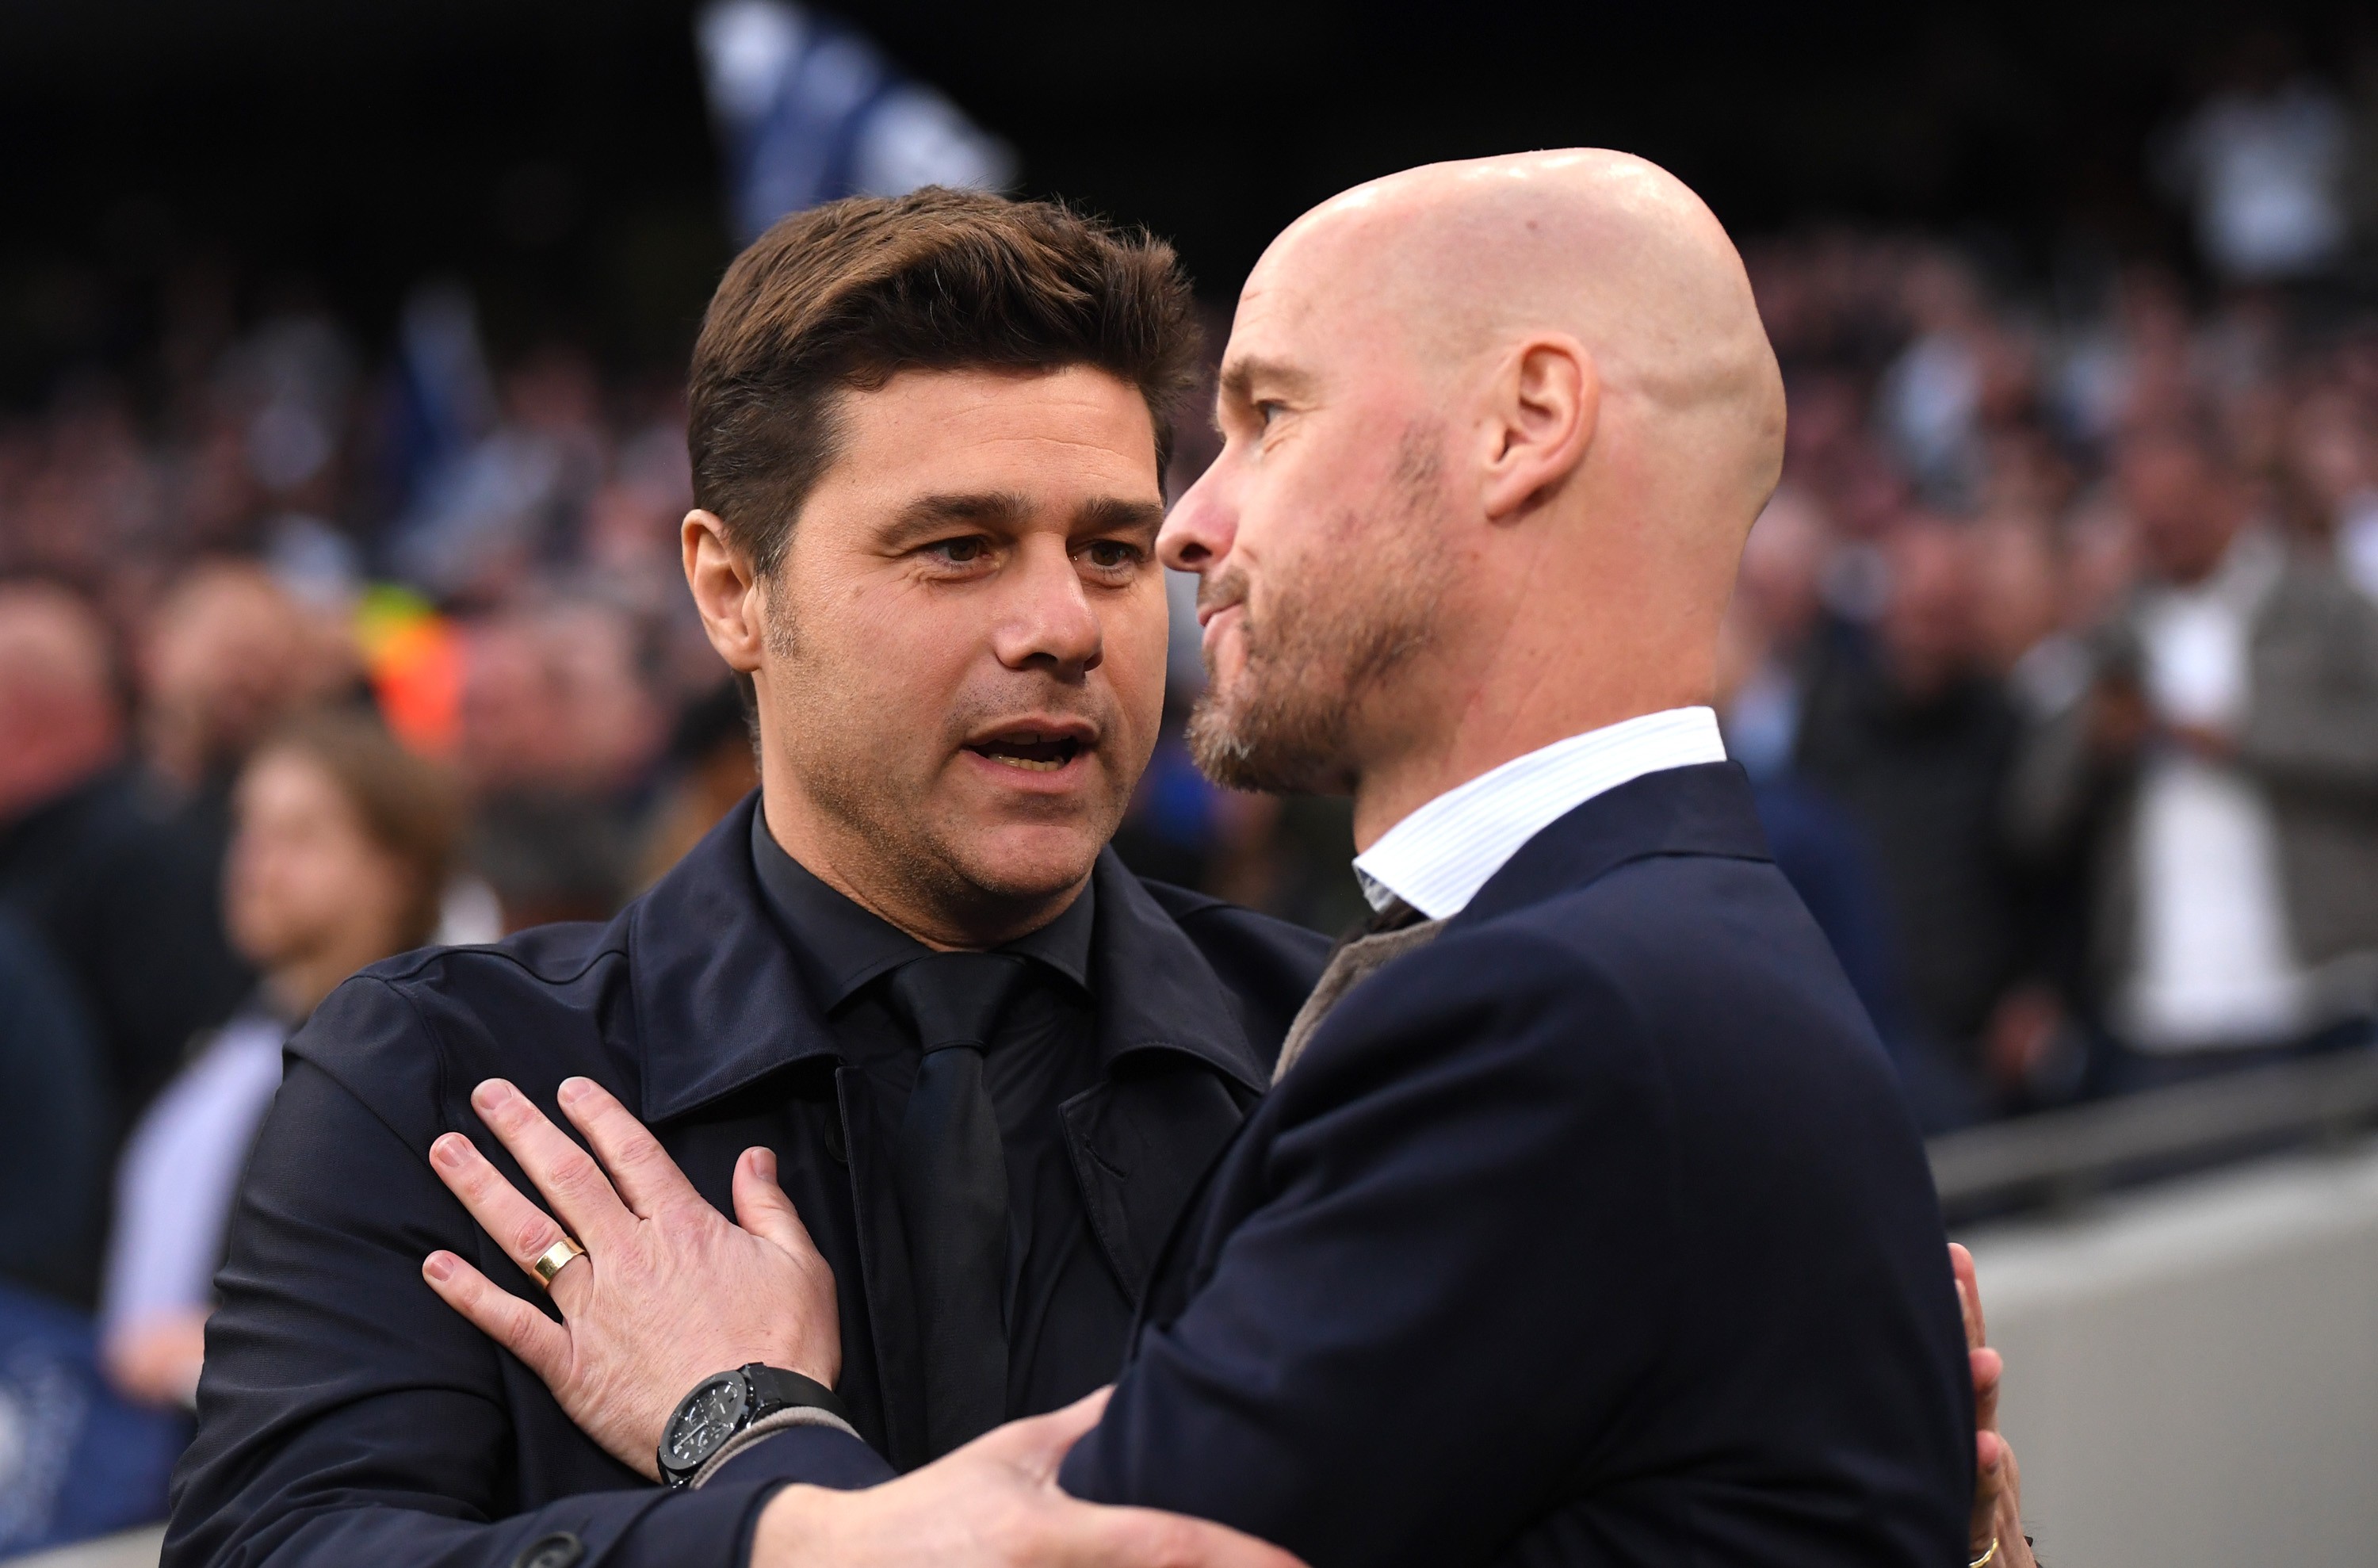 Exclusive: “It’s clear that the owners want…” – Pochettino and ten Hag feeling the heat says Romano